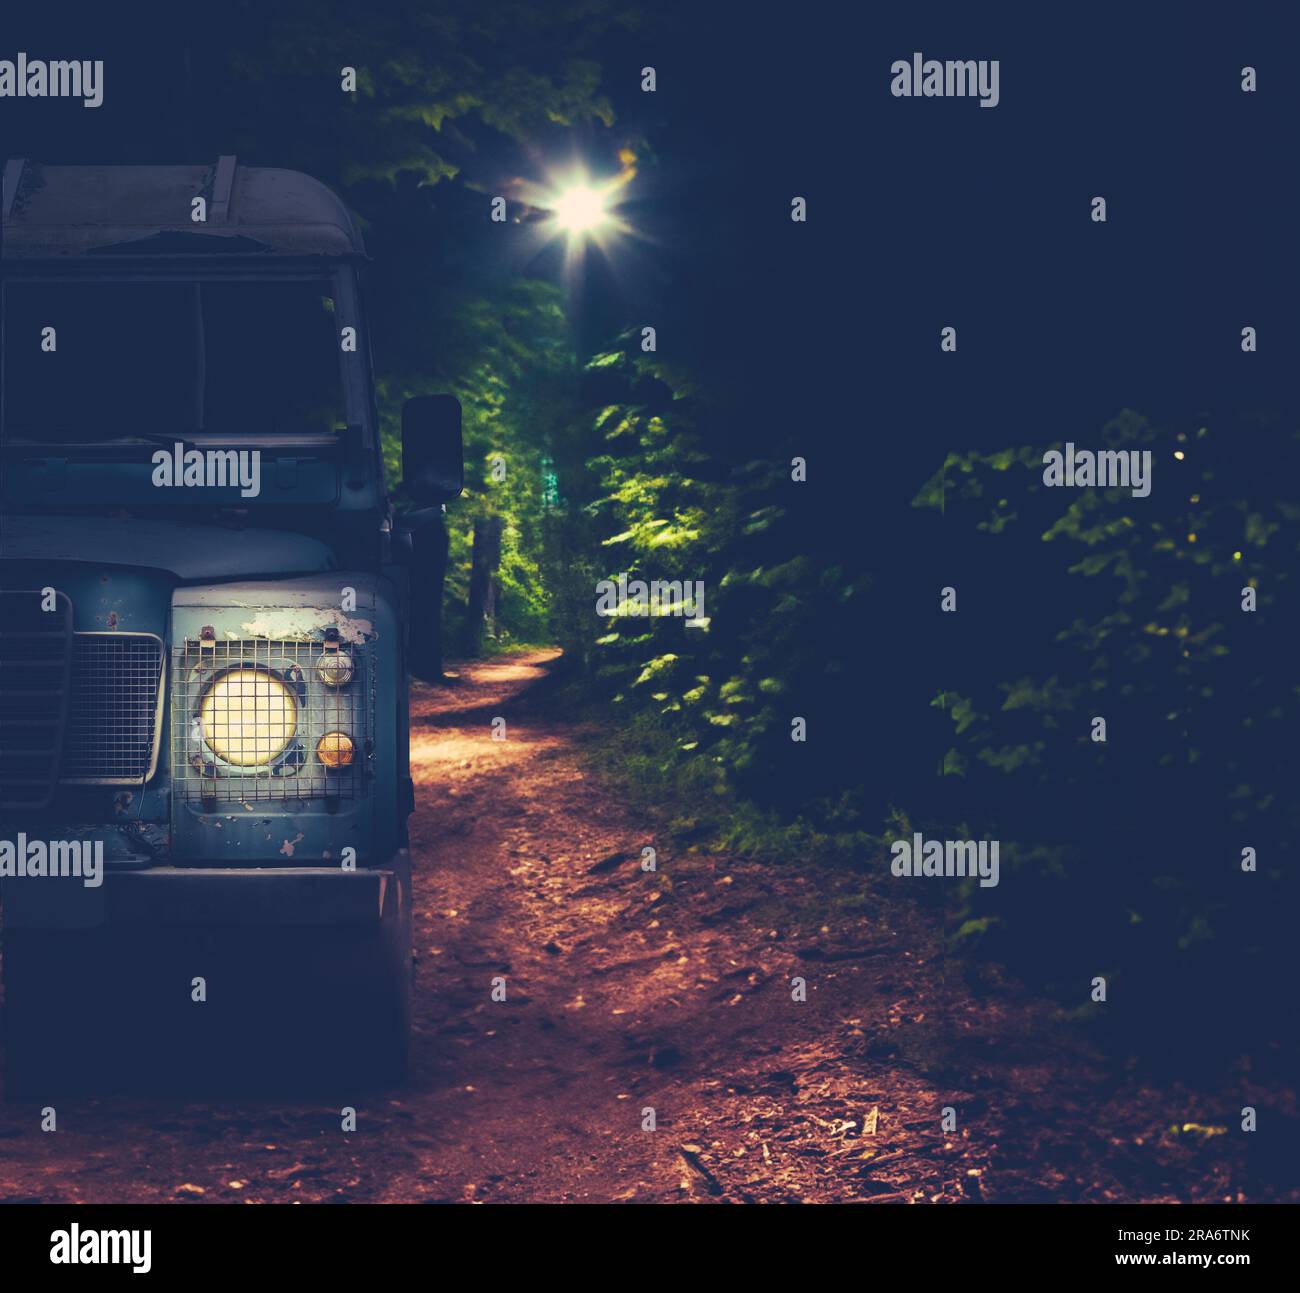 An Off-Road Vehicle Driving A Forest Trail At Night With Copy Space Stock Photo